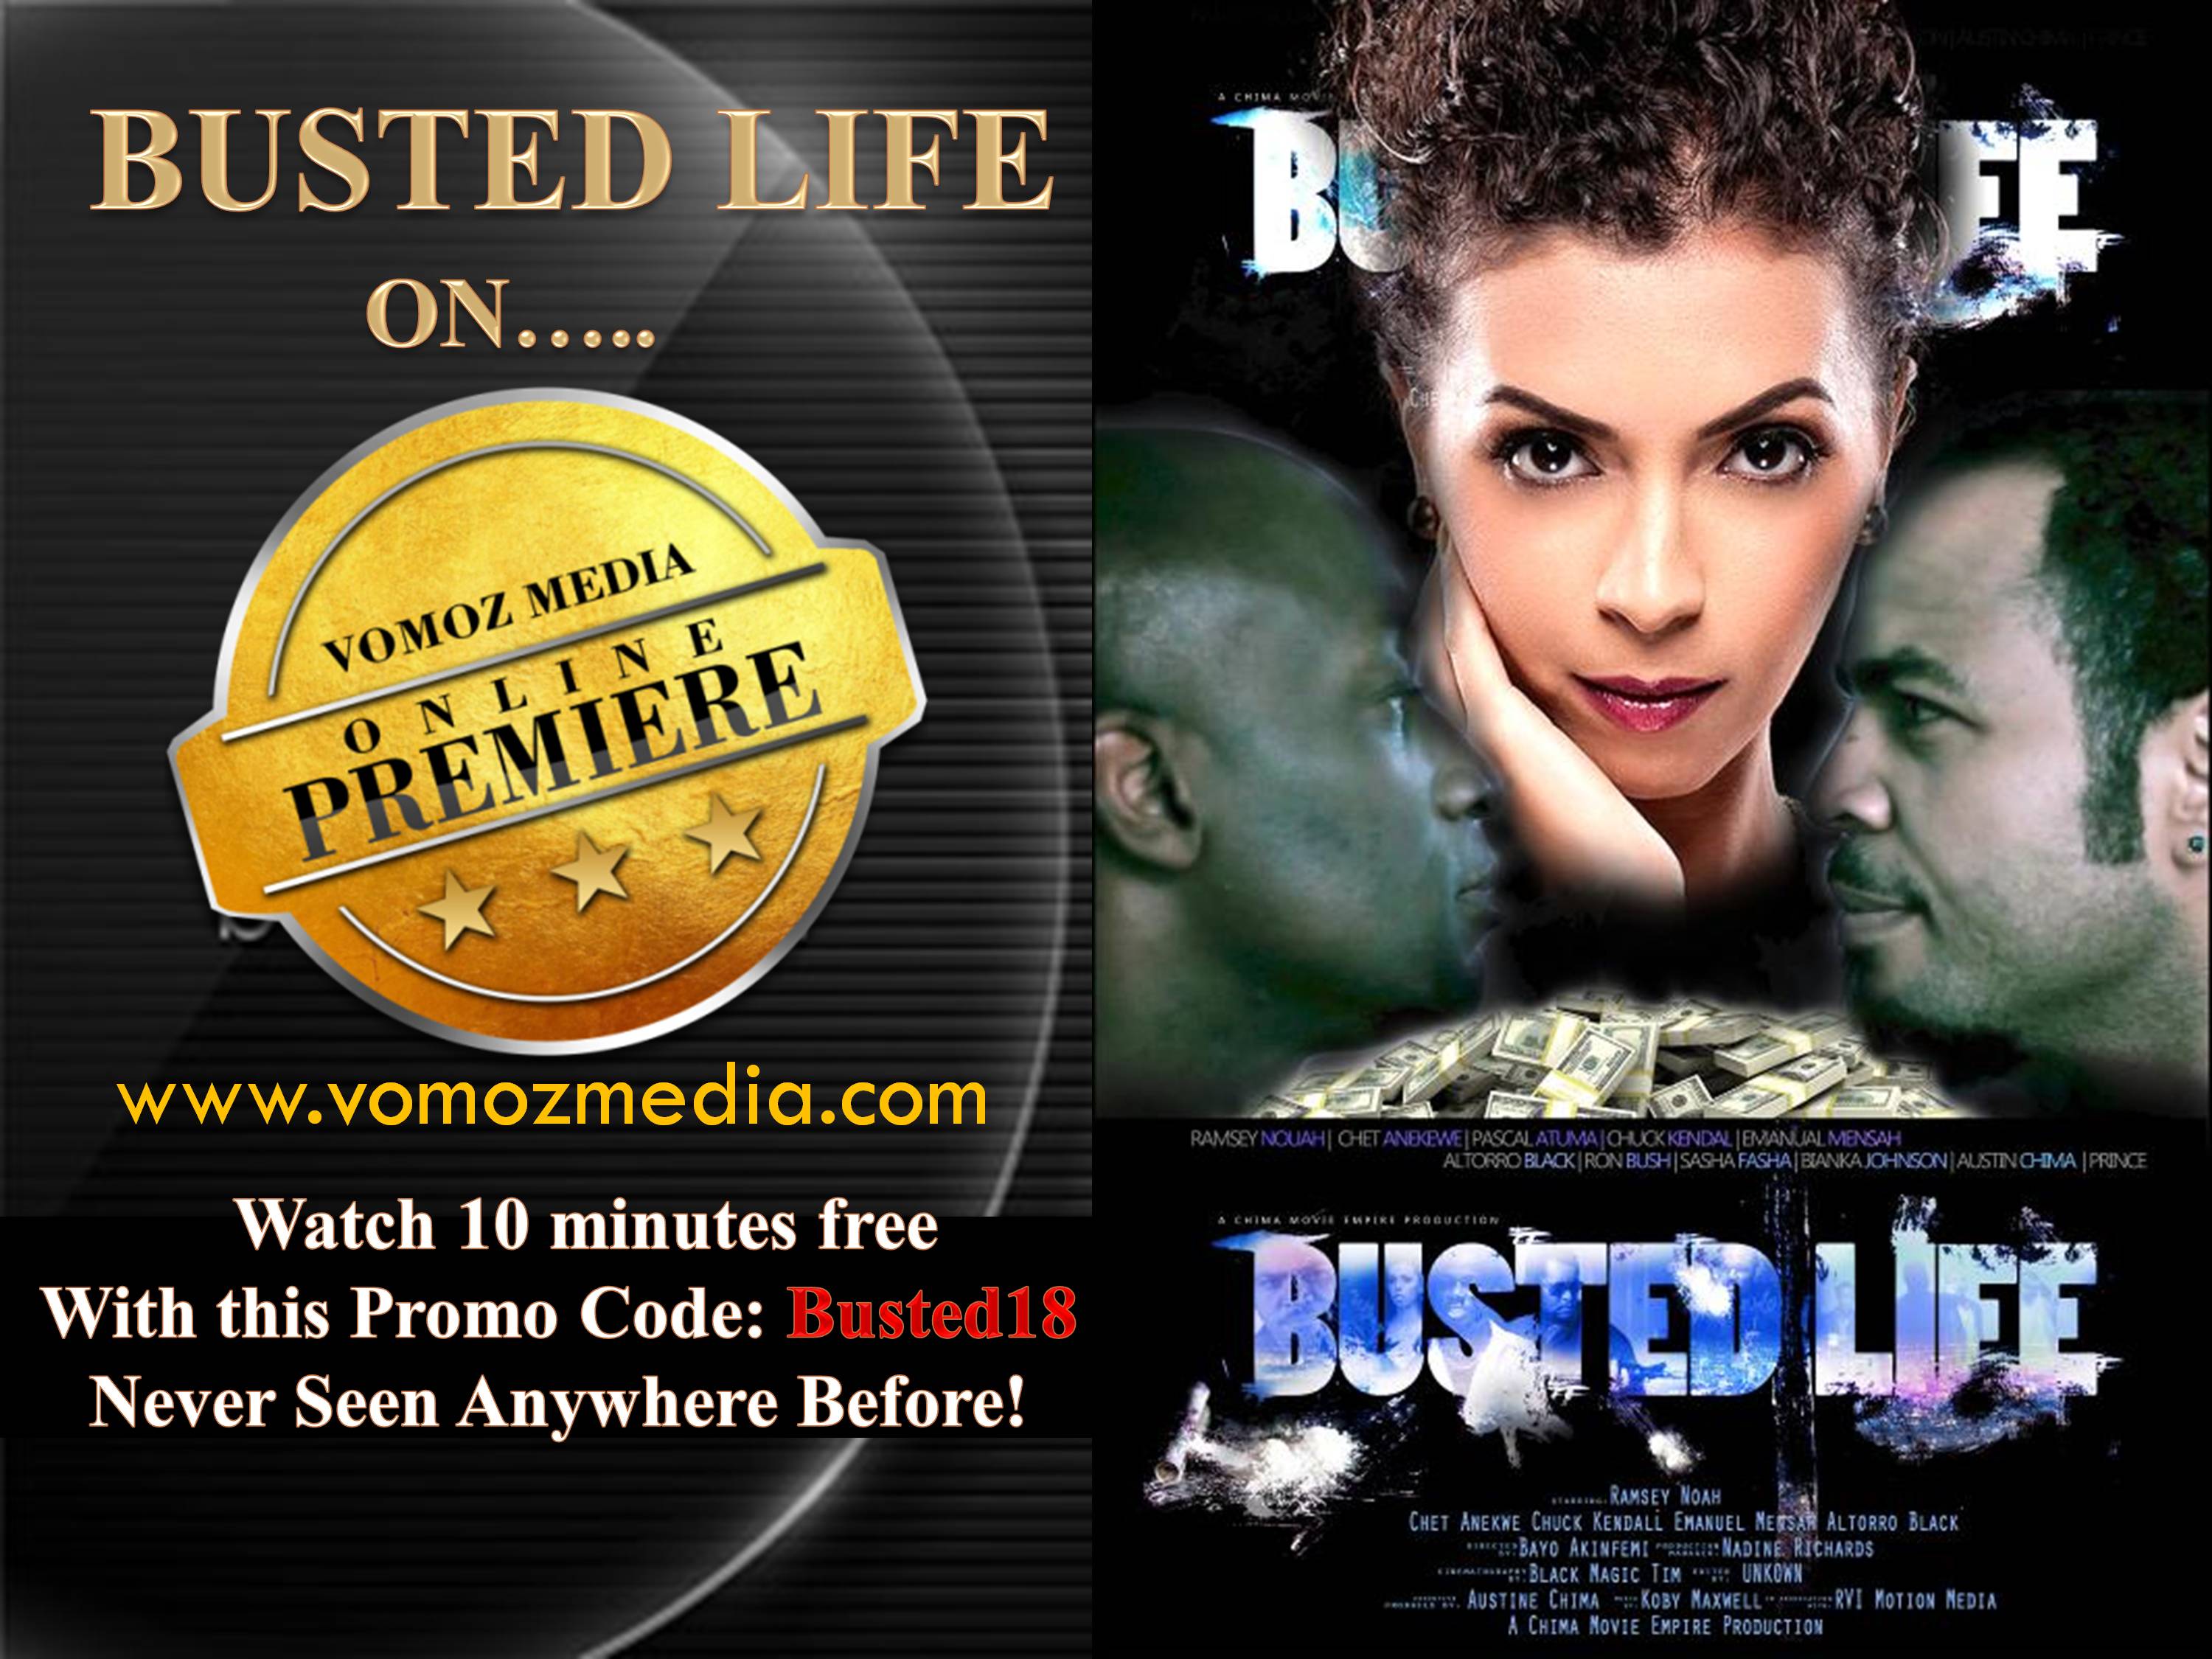 BUSTED LIFE VOMOZ1